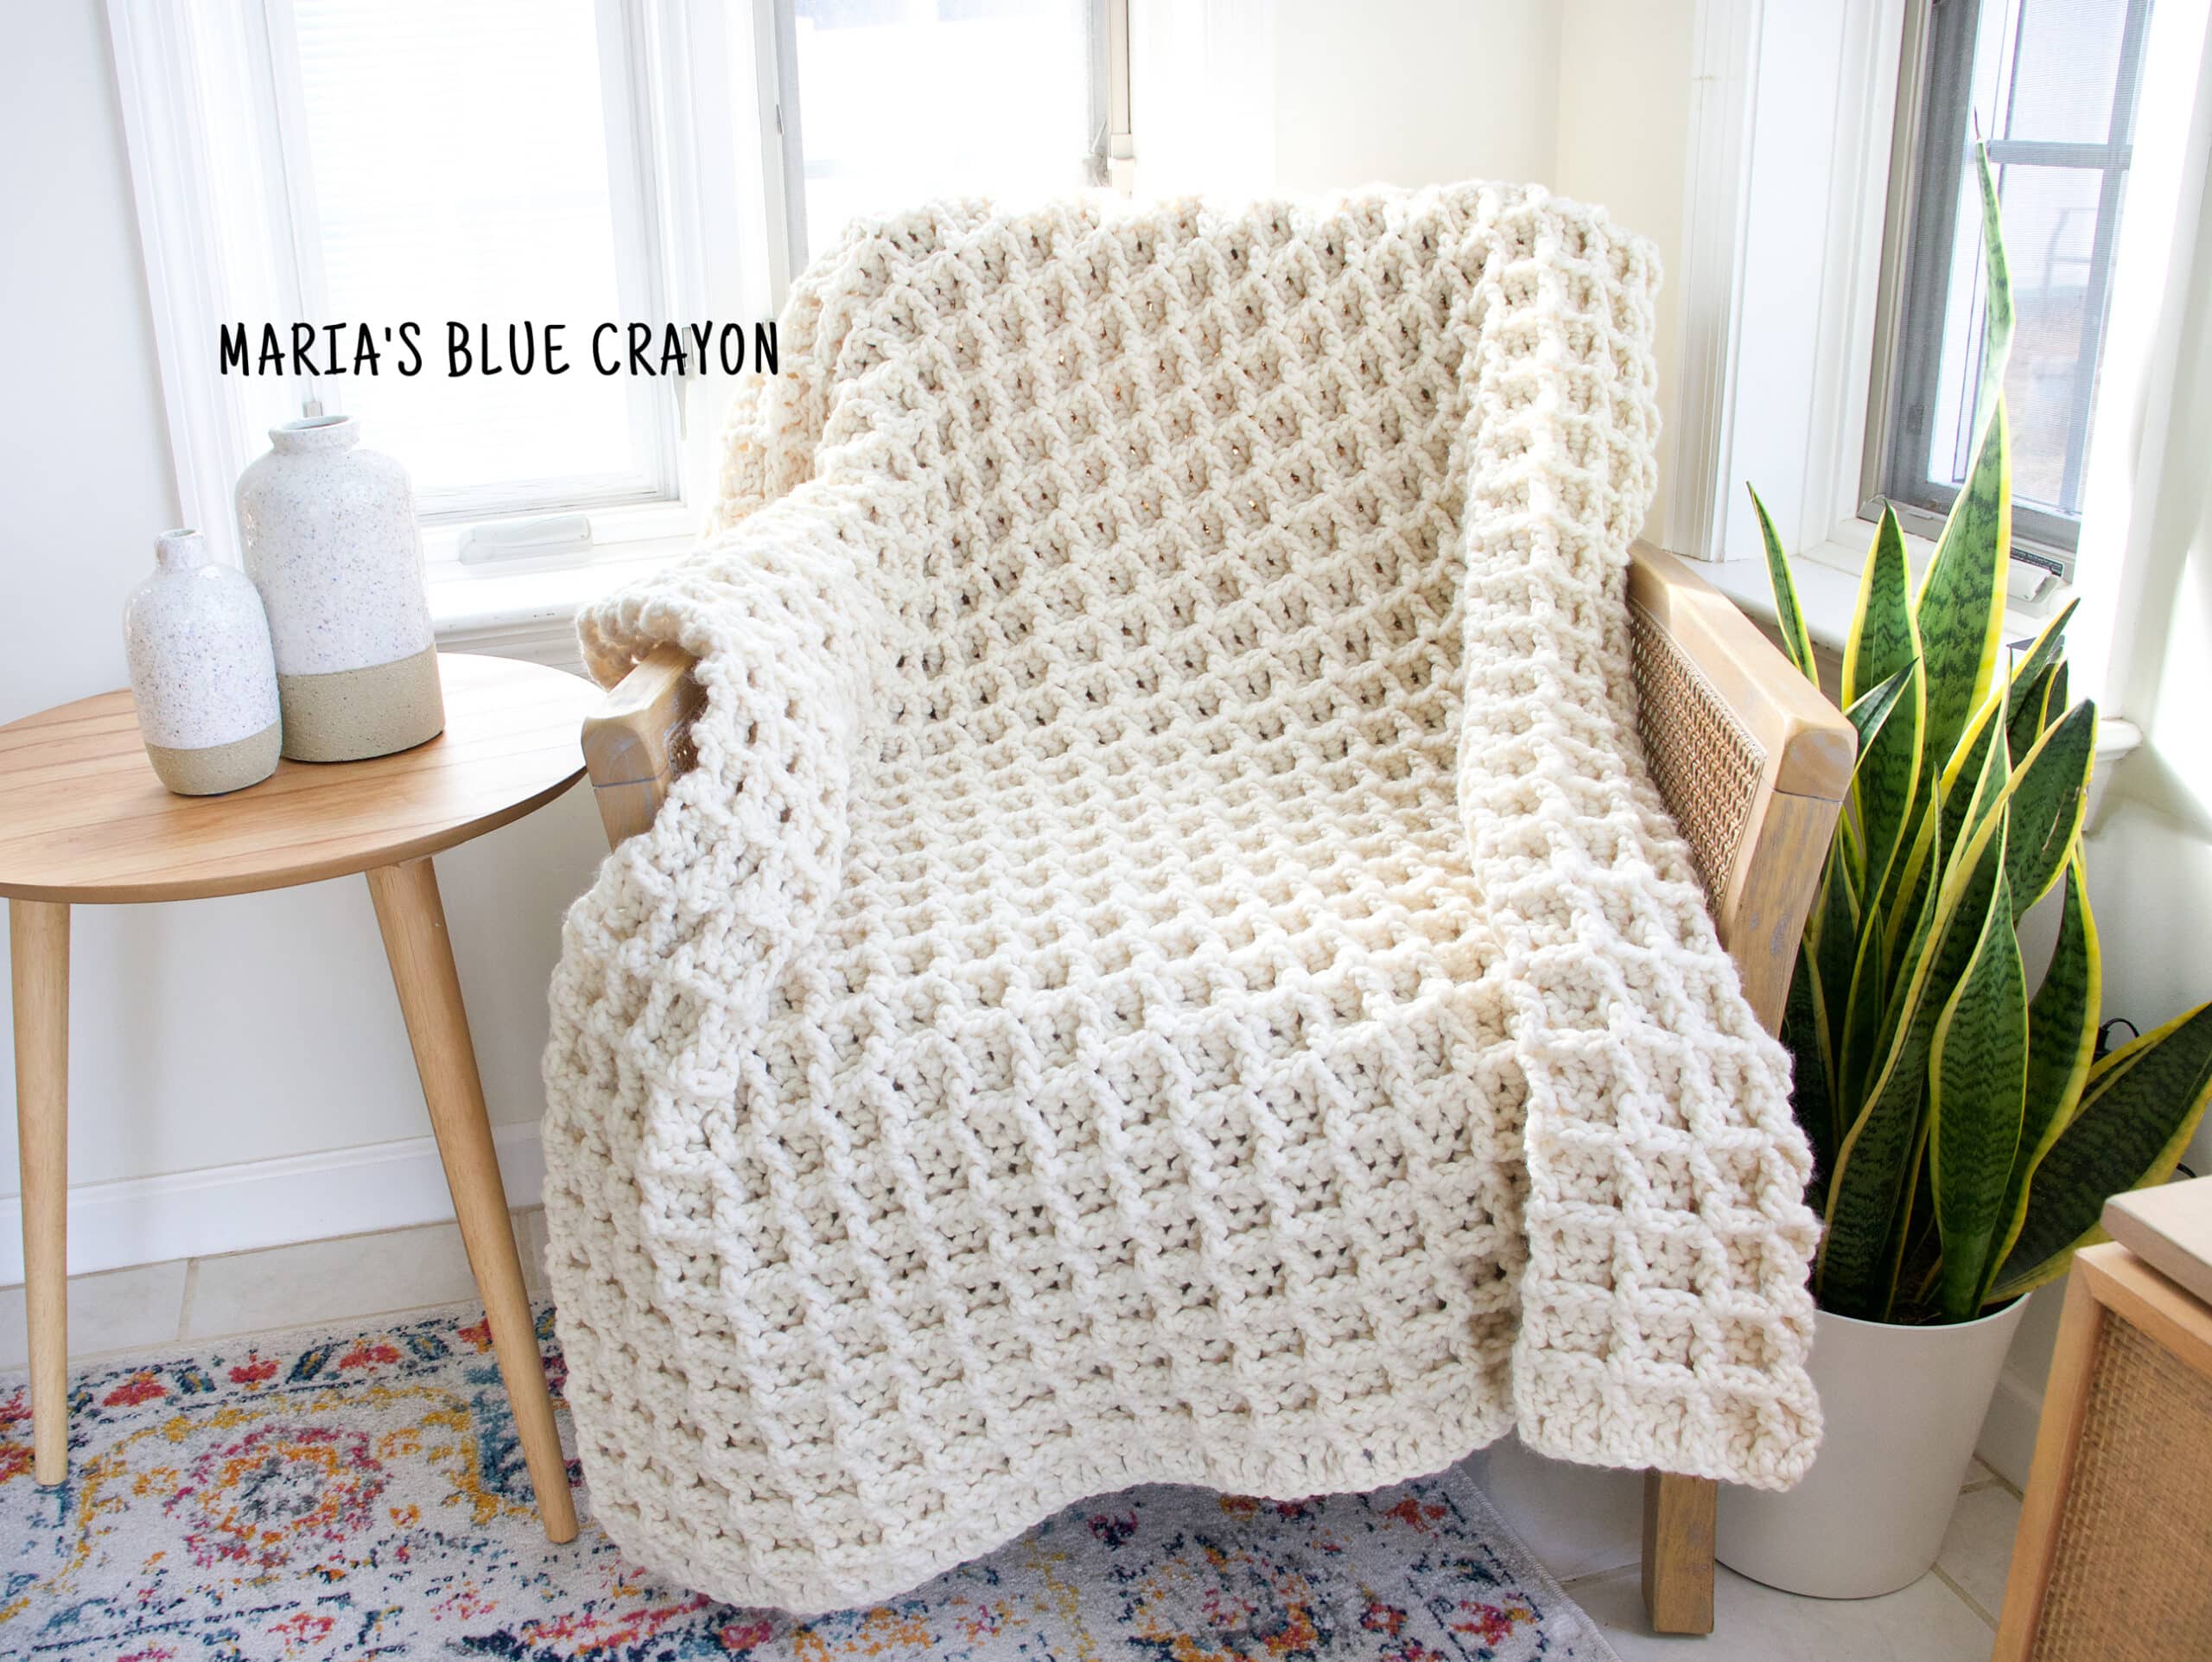 Lion Brand® Wool-Ease® Thick & Quick® Textured Knit Afghan